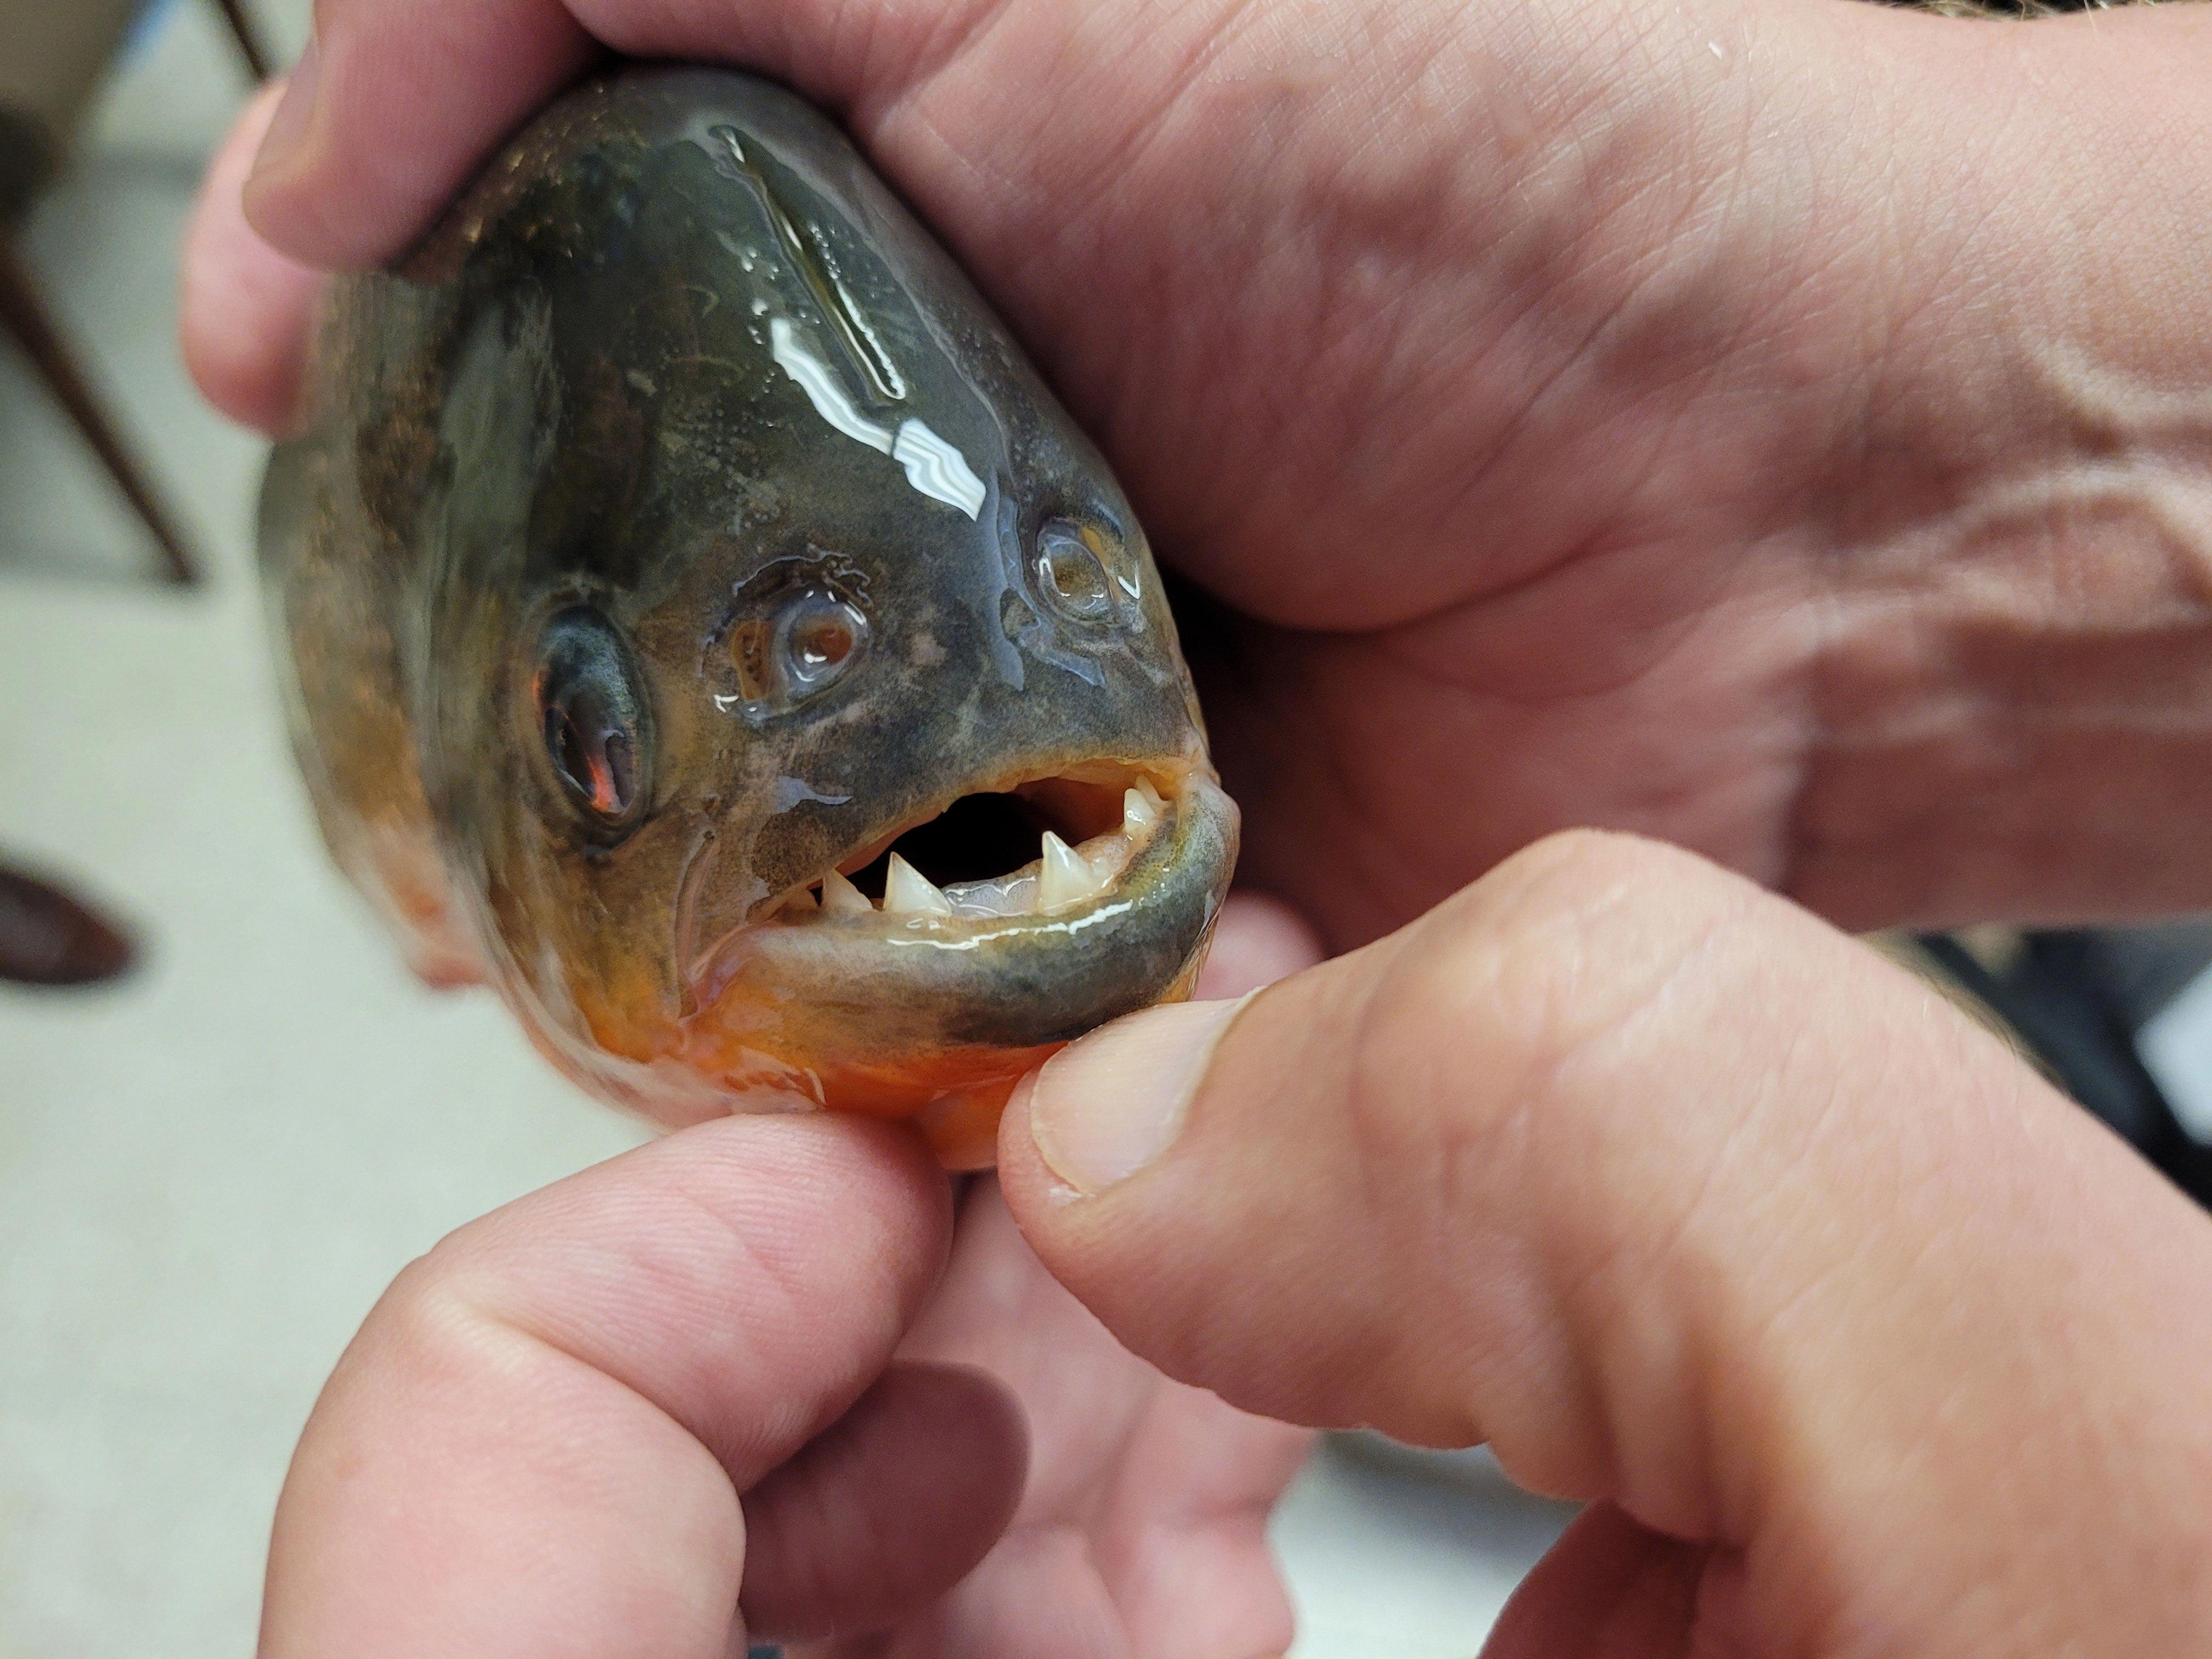 can piranhas really eat humans